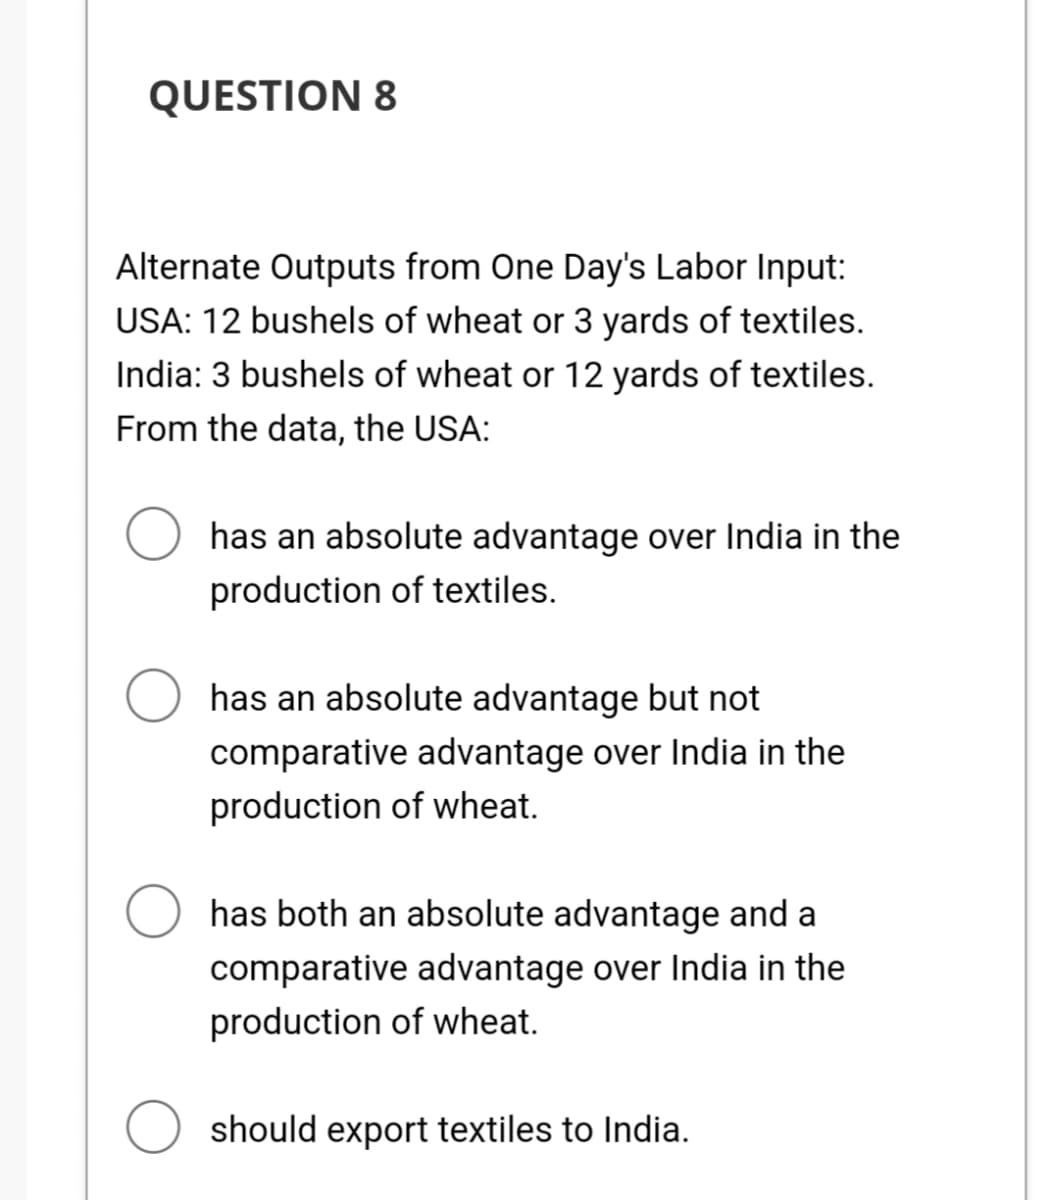 QUESTION 8
Alternate Outputs from One Day's Labor Input:
USA: 12 bushels of wheat or 3 yards of textiles.
India: 3 bushels of wheat or 12 yards of textiles.
From the data, the USA:
has an absolute advantage over India in the
production of textiles.
has an absolute advantage but not
comparative advantage over India in the
production of wheat.
has both an absolute advantage and a
comparative advantage over India in the
production of wheat.
should export textiles to India.